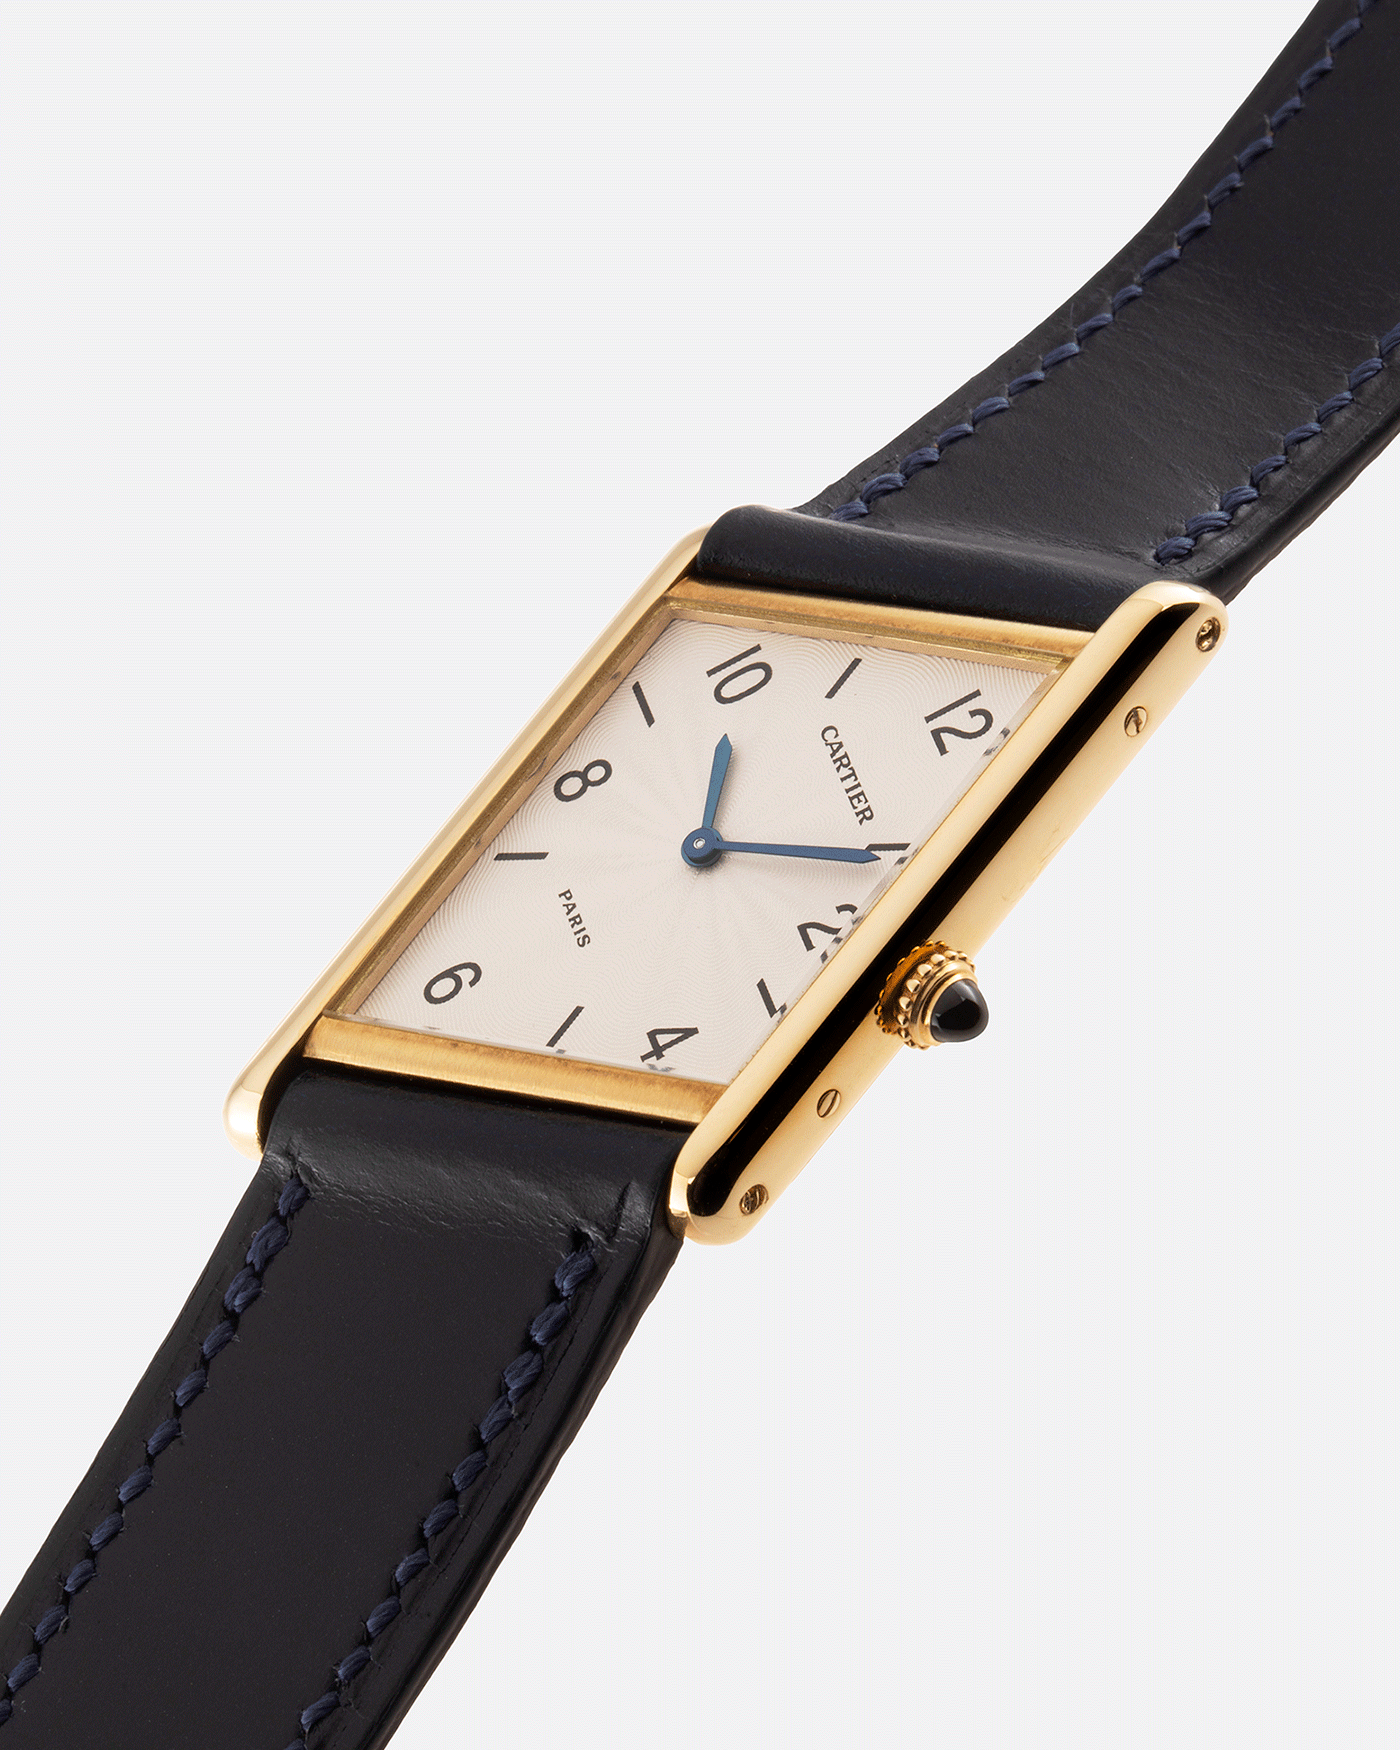 Brand: Cartier Year: 1996 Model: Tank Asymmetrique Limited Reference Number: 2488 Material: 18k Yellow Gold Movement: Cartier Cal. 9P2 Case Diameter: 23mm X 33mm Strap: Nostime Blue Leather with 18k Cartier Yellow Gold Deployant